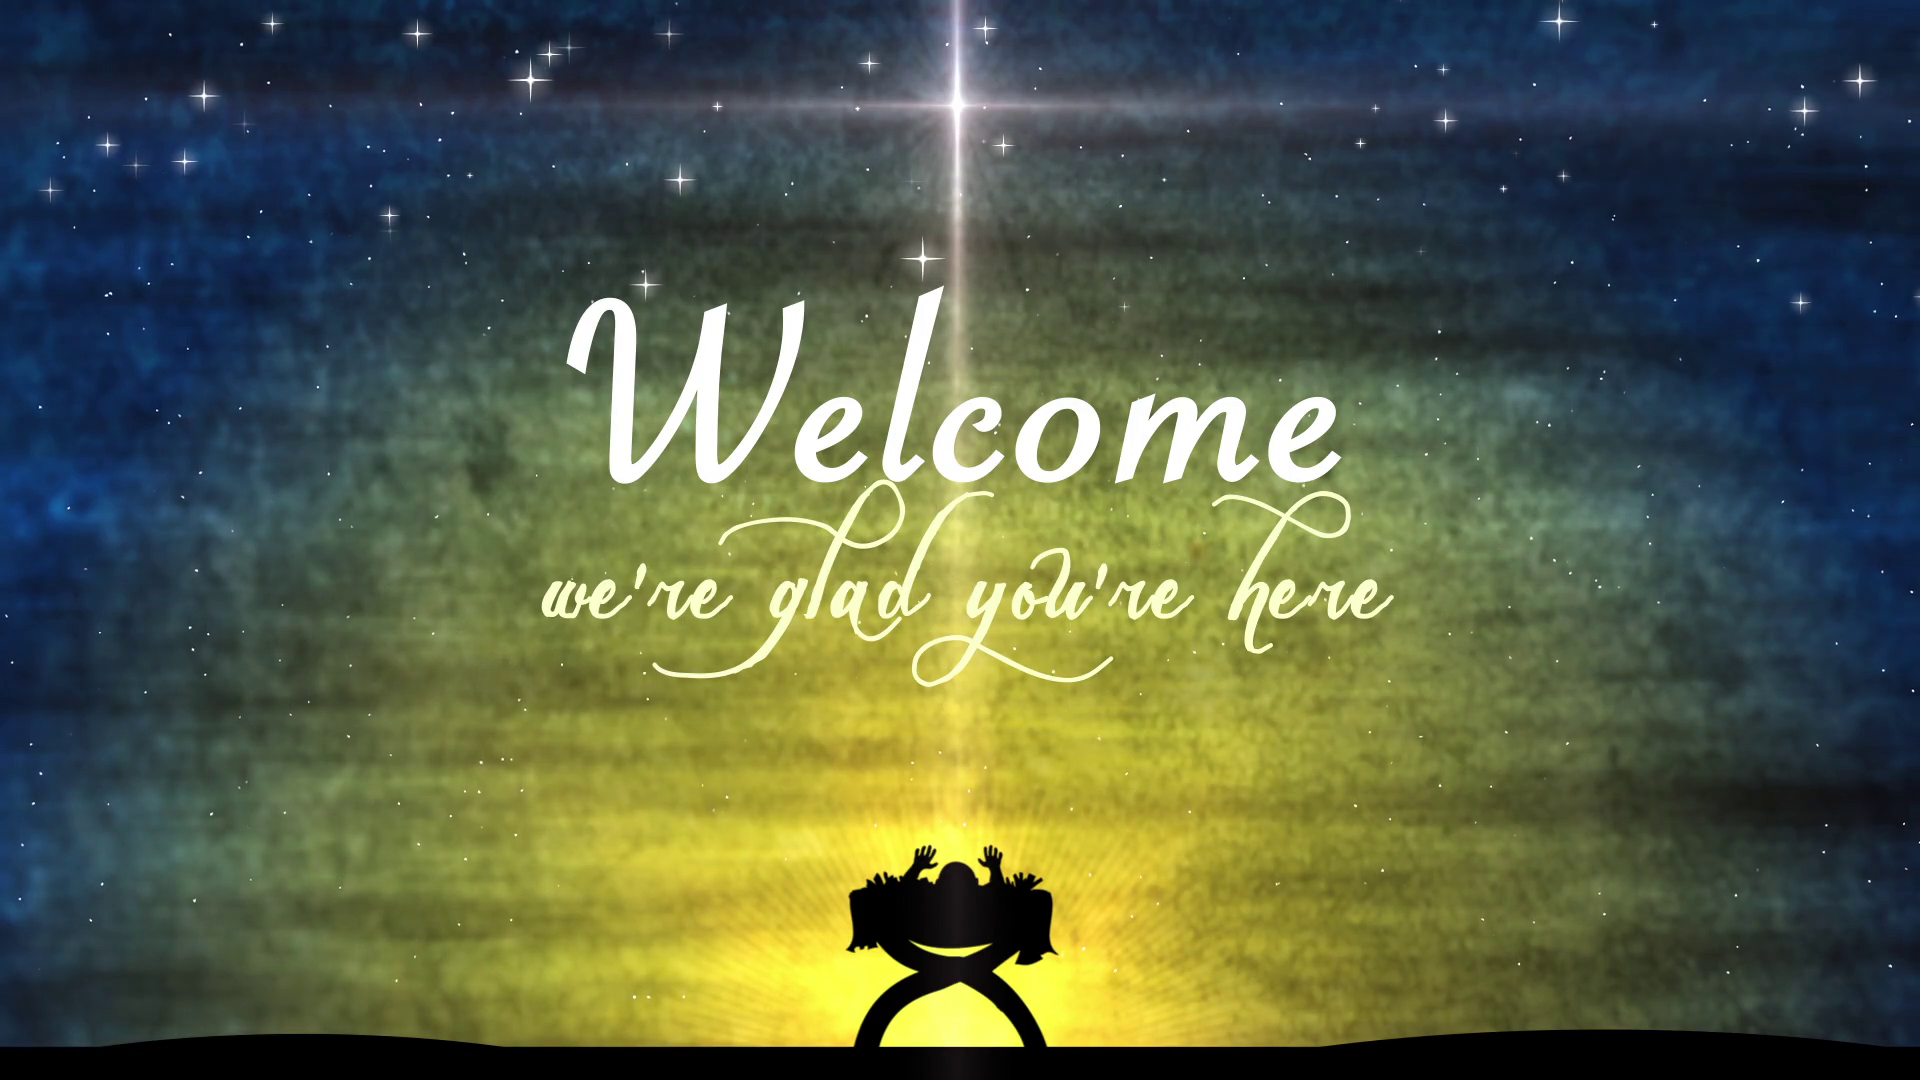 Welcome To Church Wallpapers - Wallpaper Cave